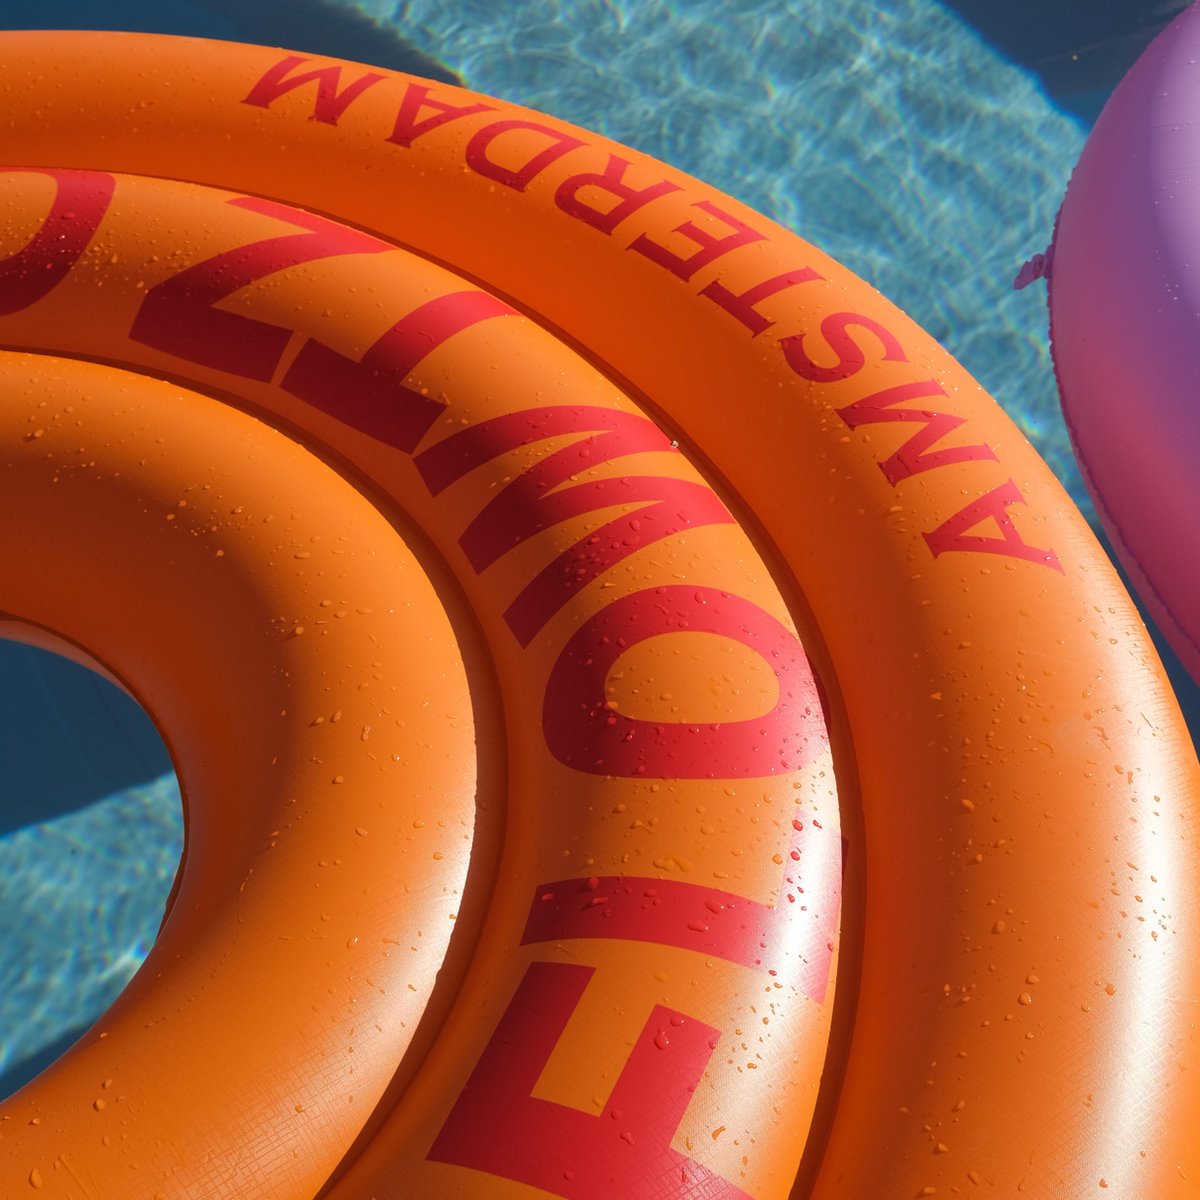 Have great fun with our XXL Inflatable Tire 2 Meters! - Ideal for water fun and sledding!